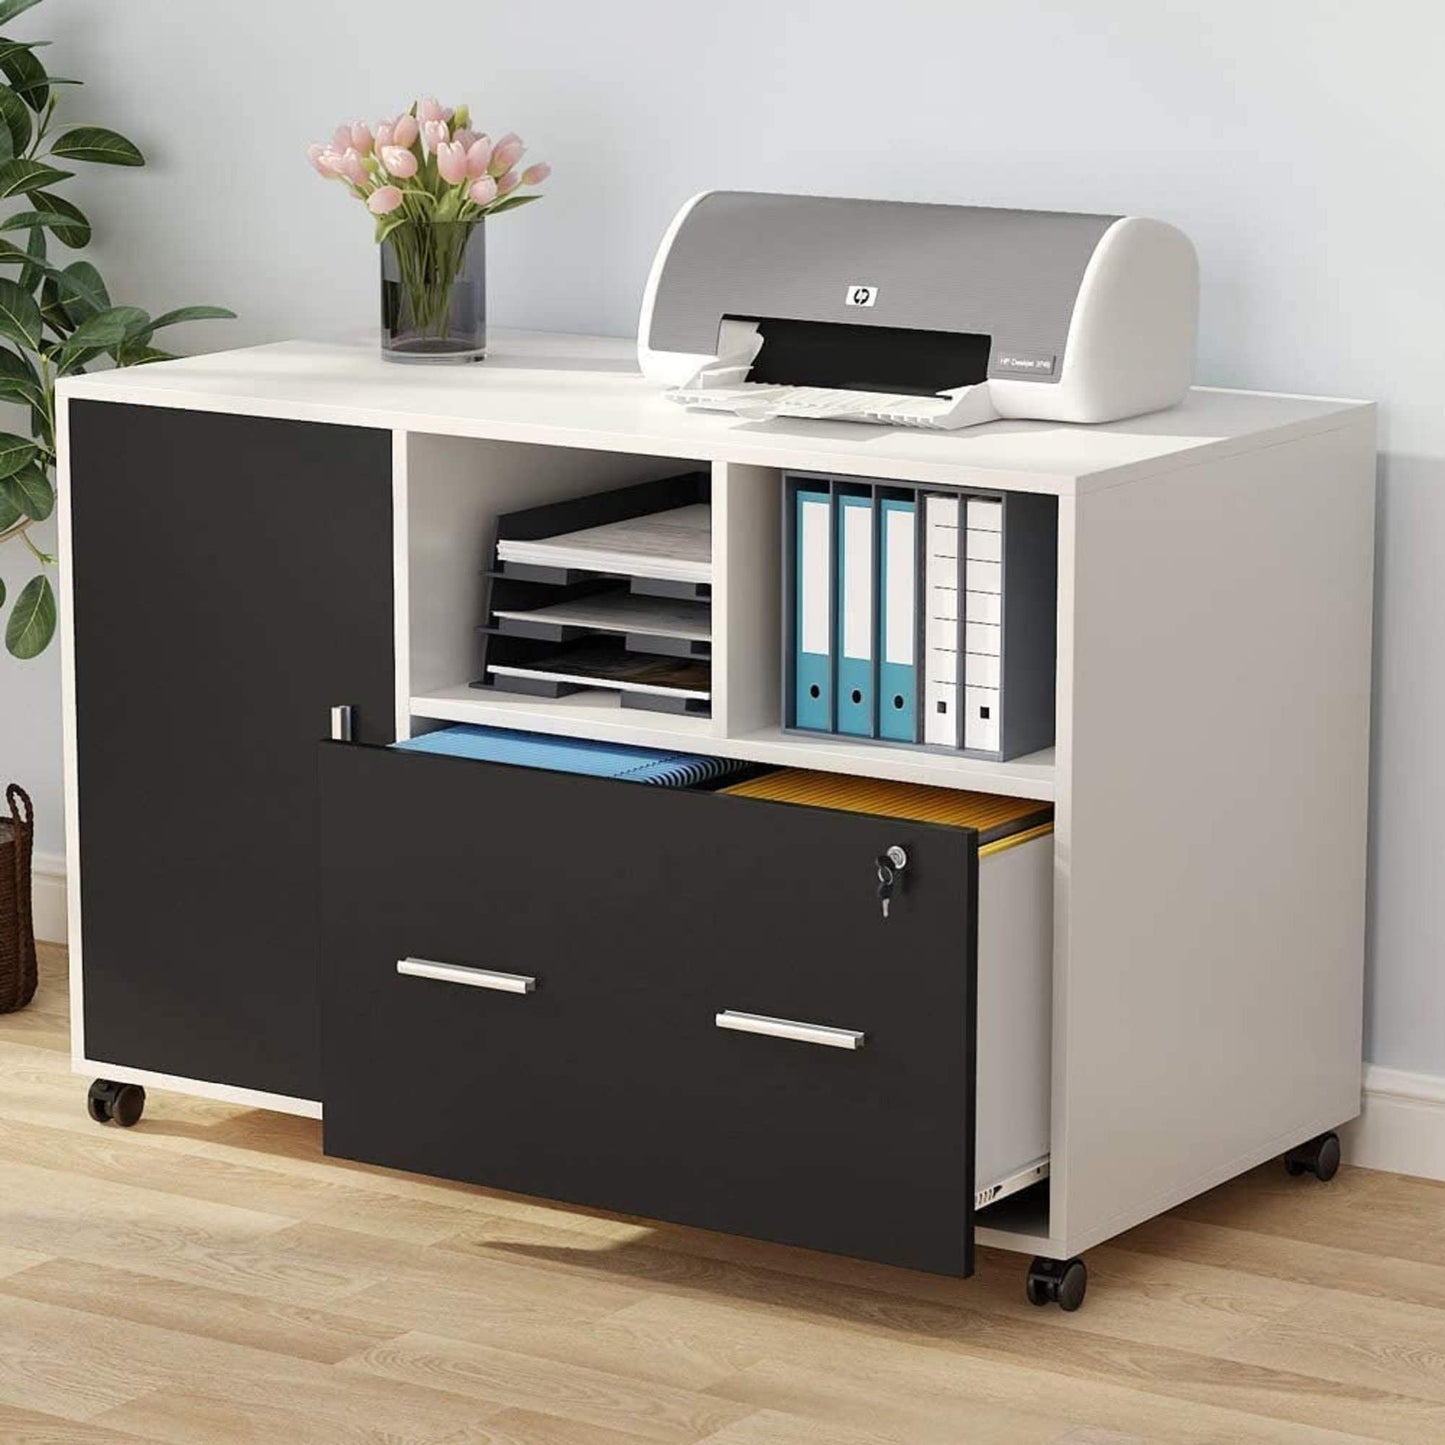 Large File Cabinet with Lock and Drawer, Modern Mobile Lateral Filing Cabinet